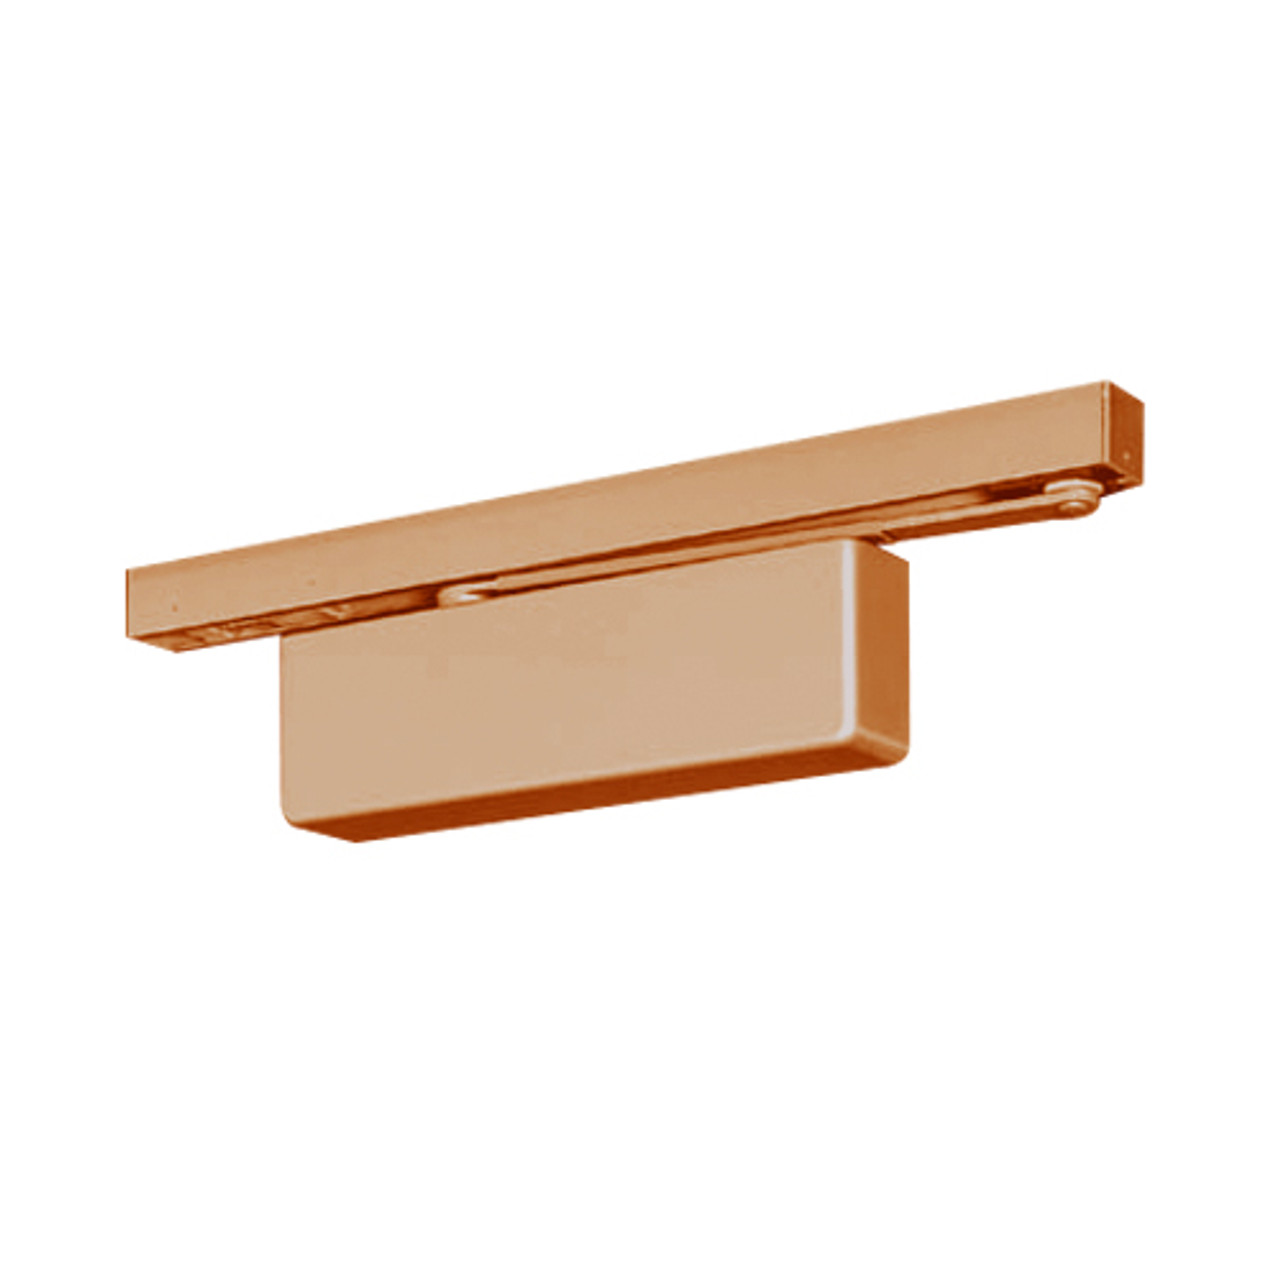 P4400ST-691 Yale 4400 Series Institutional Door Closer with Push Side Slide Track Arm in Light Bronze